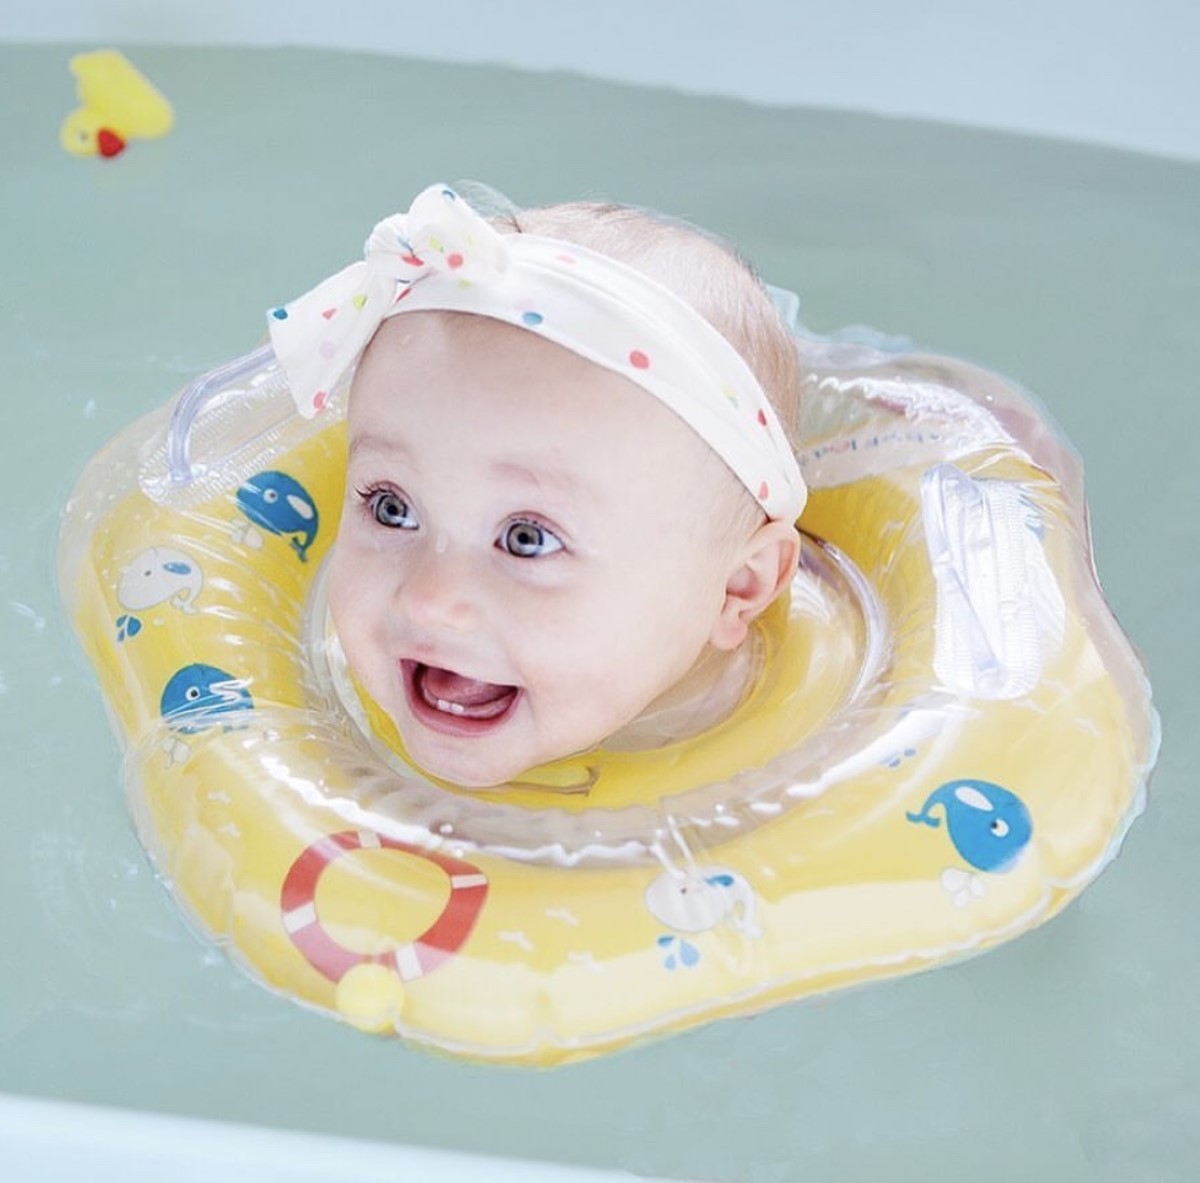 Pikkaboo - ISwimSafe Infant Neck Floater - Yellow - Buy Online at Best ...